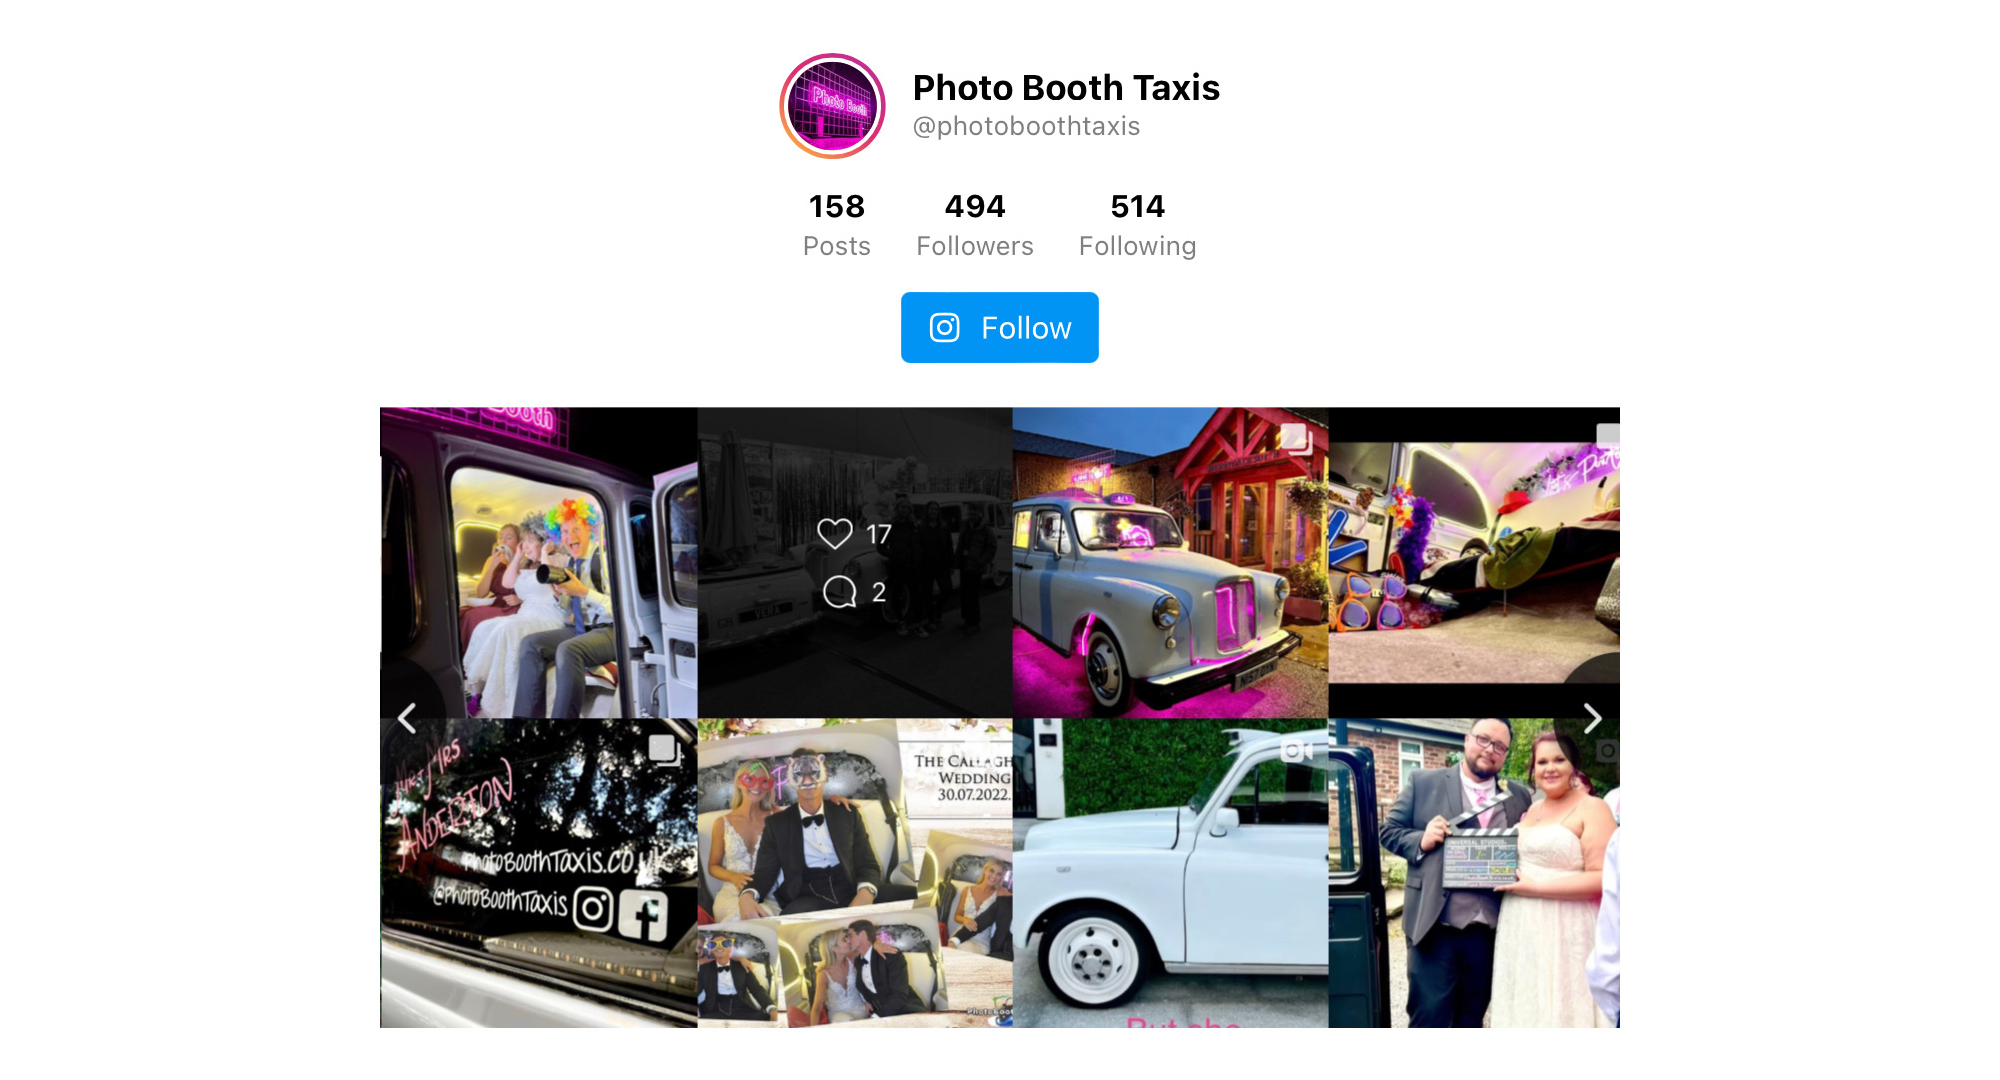 Photo Booth Taxis instagram 
@PhotoBoothTaxis